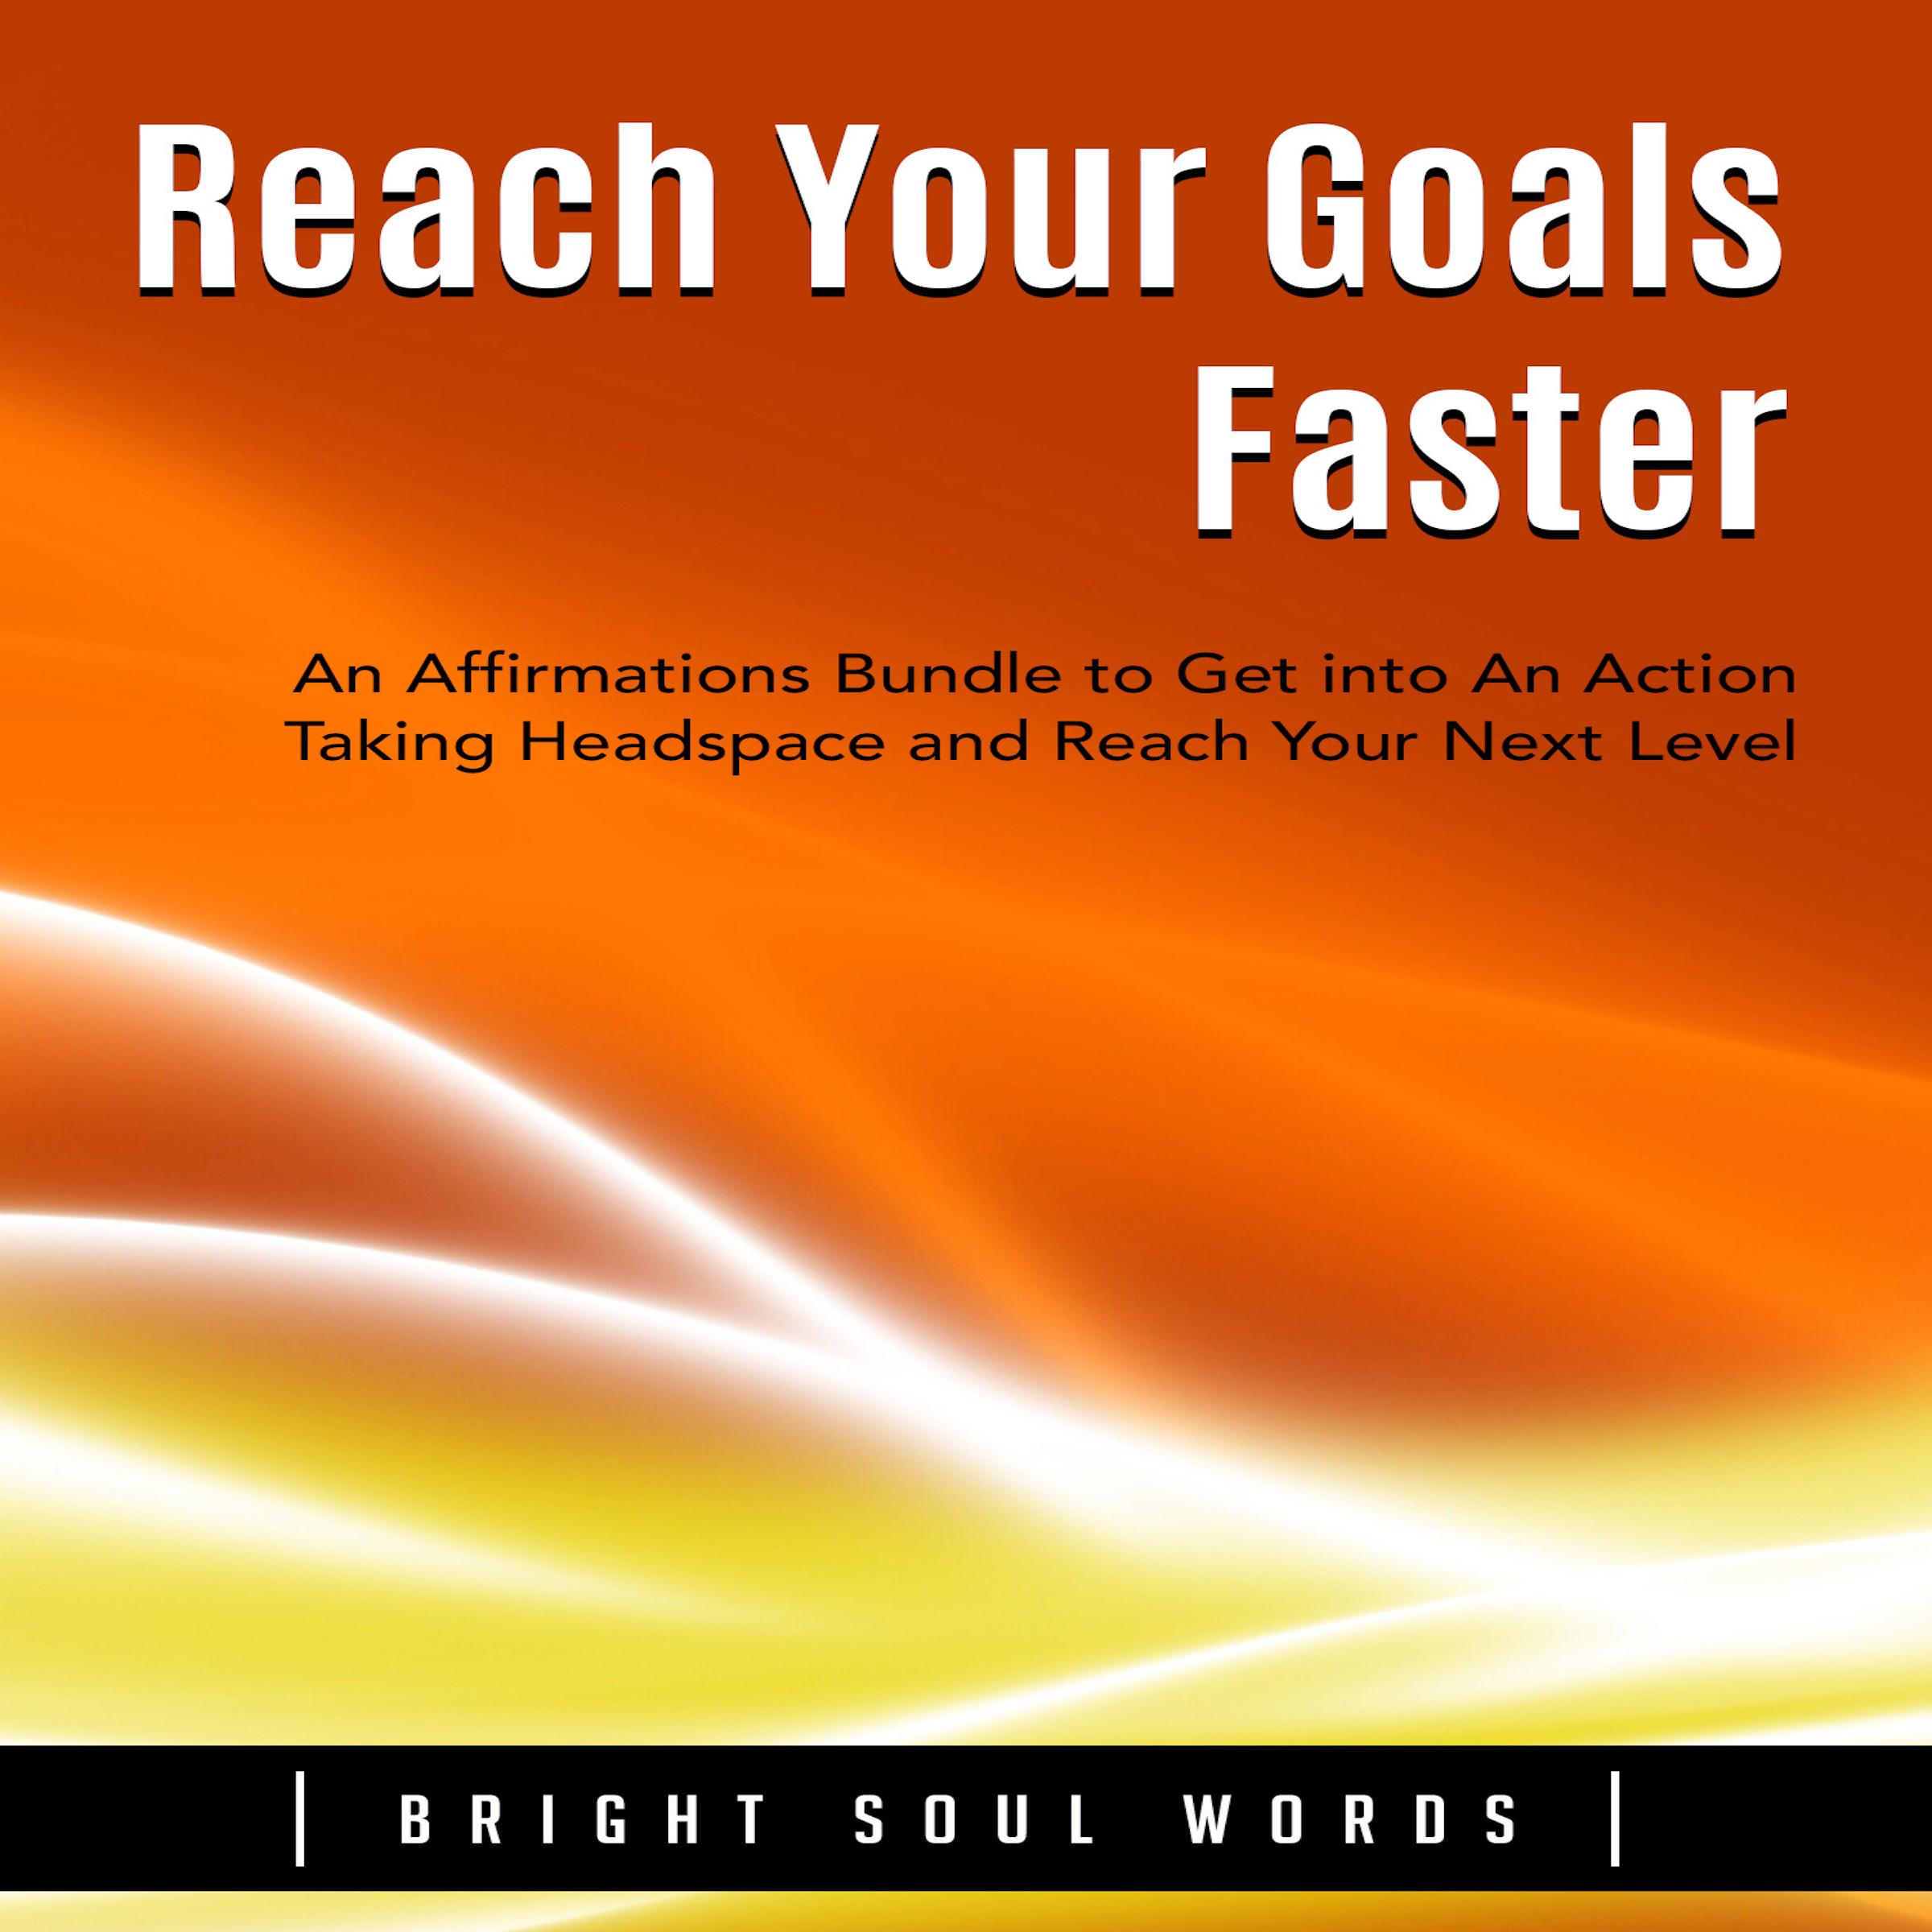 Reach Your Goals Faster: An Affirmations Bundle to Get into An Action Taking Headspace and Reach Your Next Level